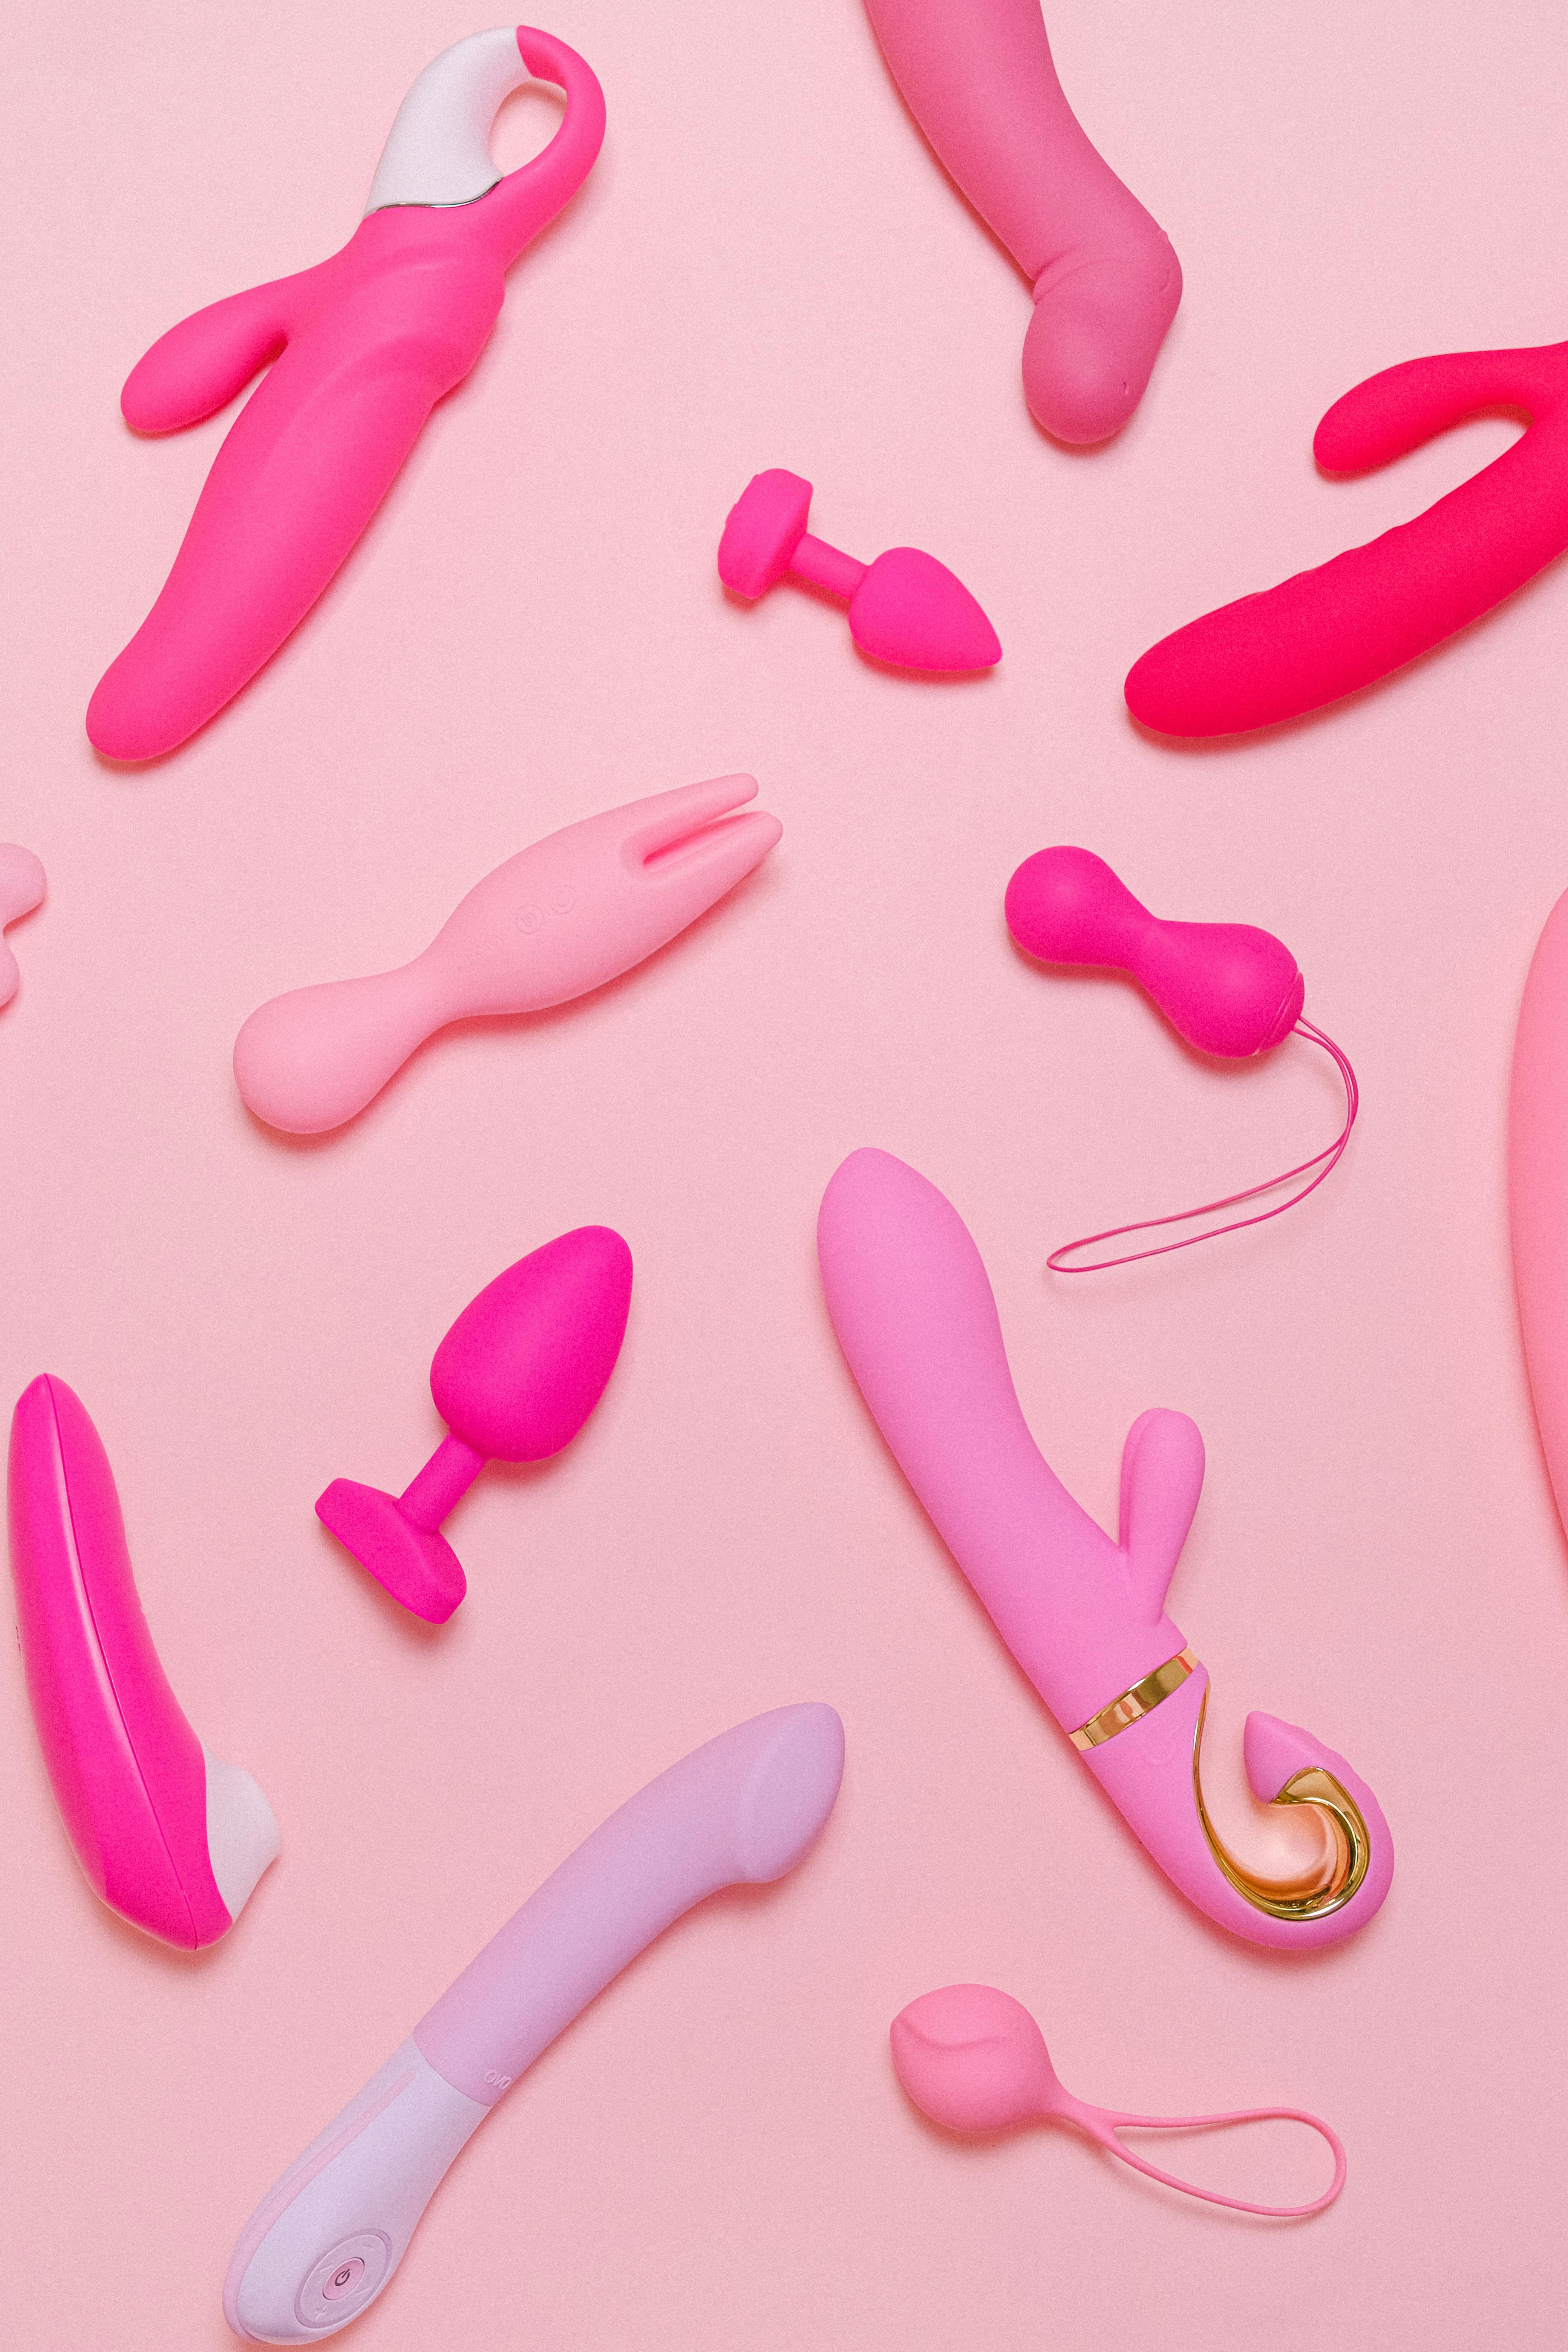 where to buy sex toys online